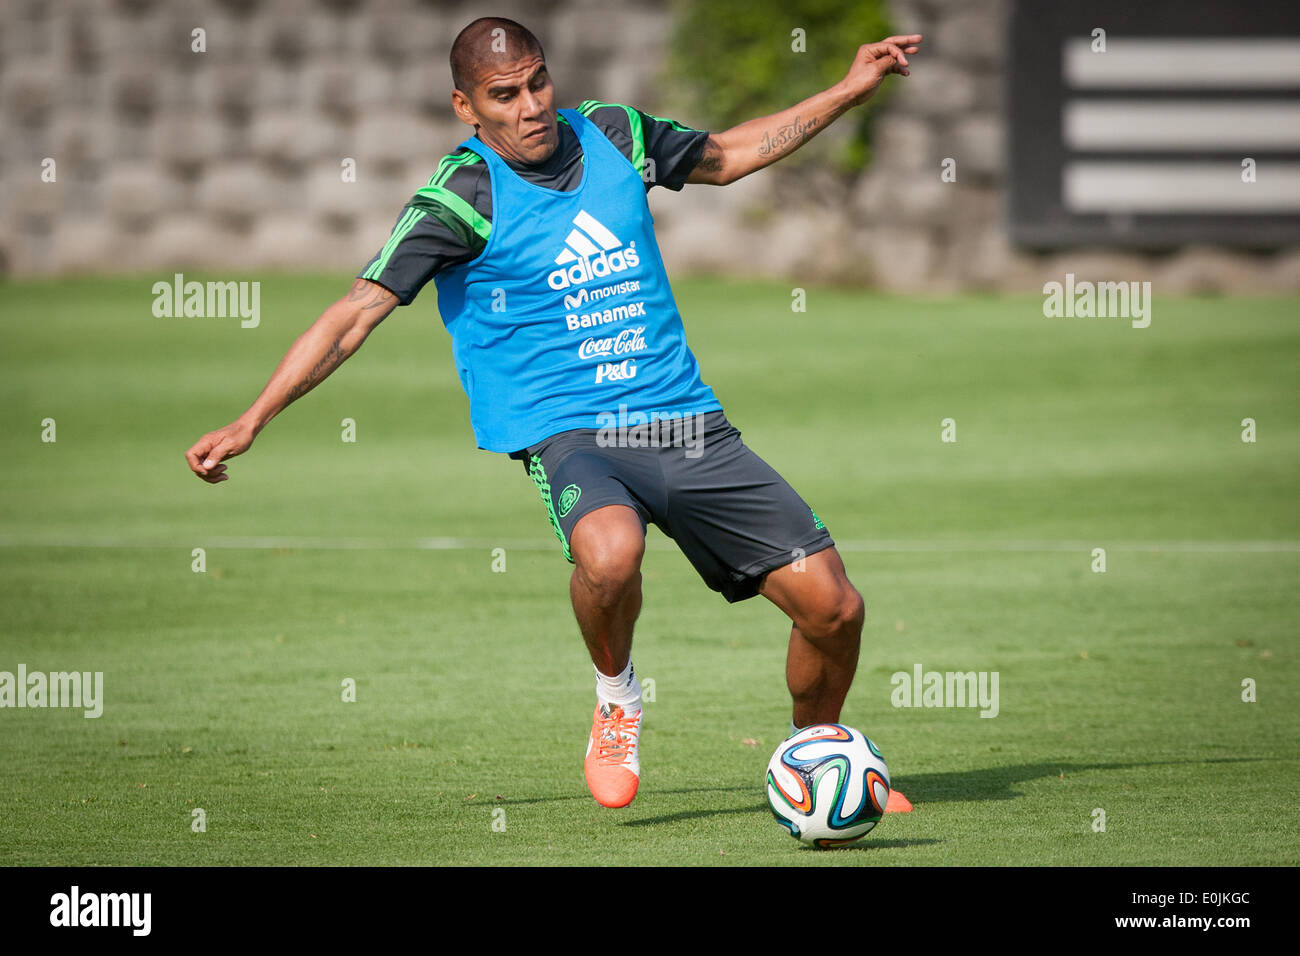 Mexico City, Mexico. 14th May, 2014. Carlos Salcido from Mexico's national soccer team takes part in a training session, in Mexico City, capital of Mexico, on May 14, 2014. Credit:  Pedro Mera/Xinhua/Alamy Live News Stock Photo